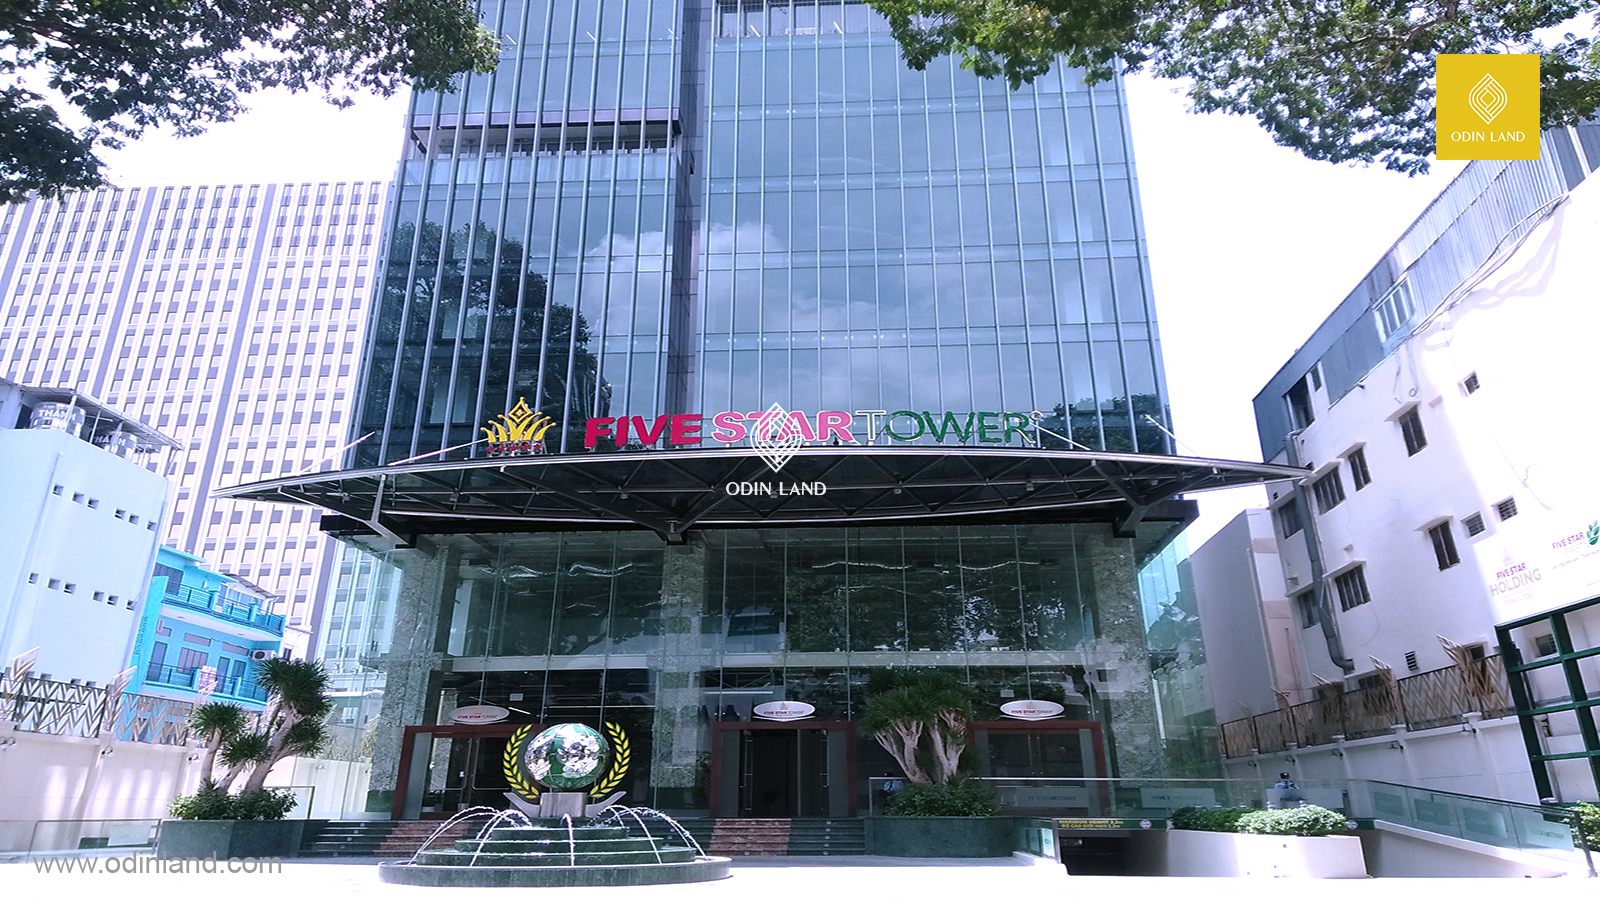 Five Star Tower